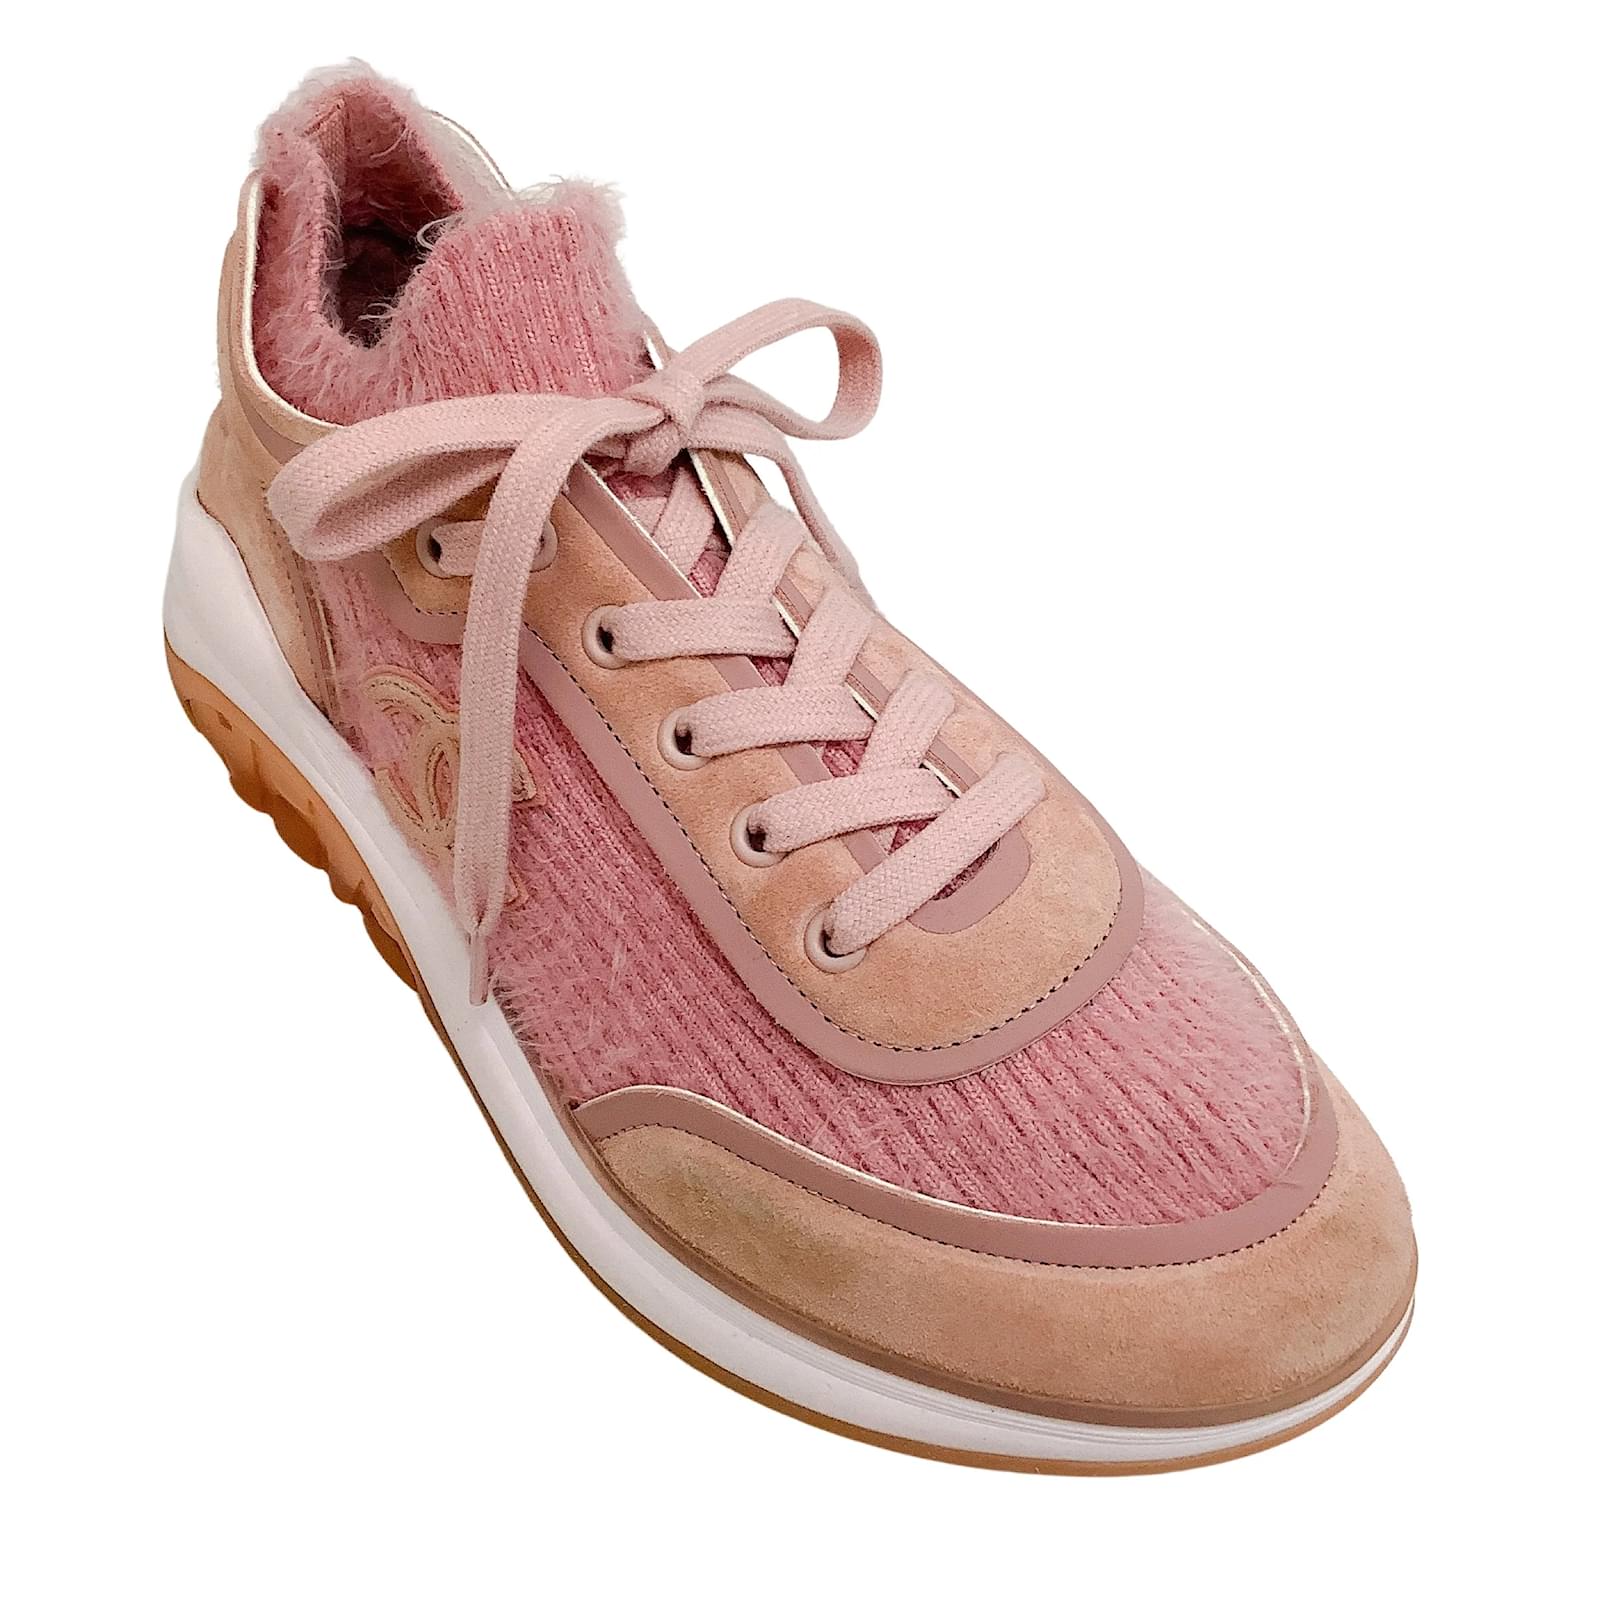 Chanel Calfskin Logo Sneakers White Pink Size 36.5 – Coco Approved